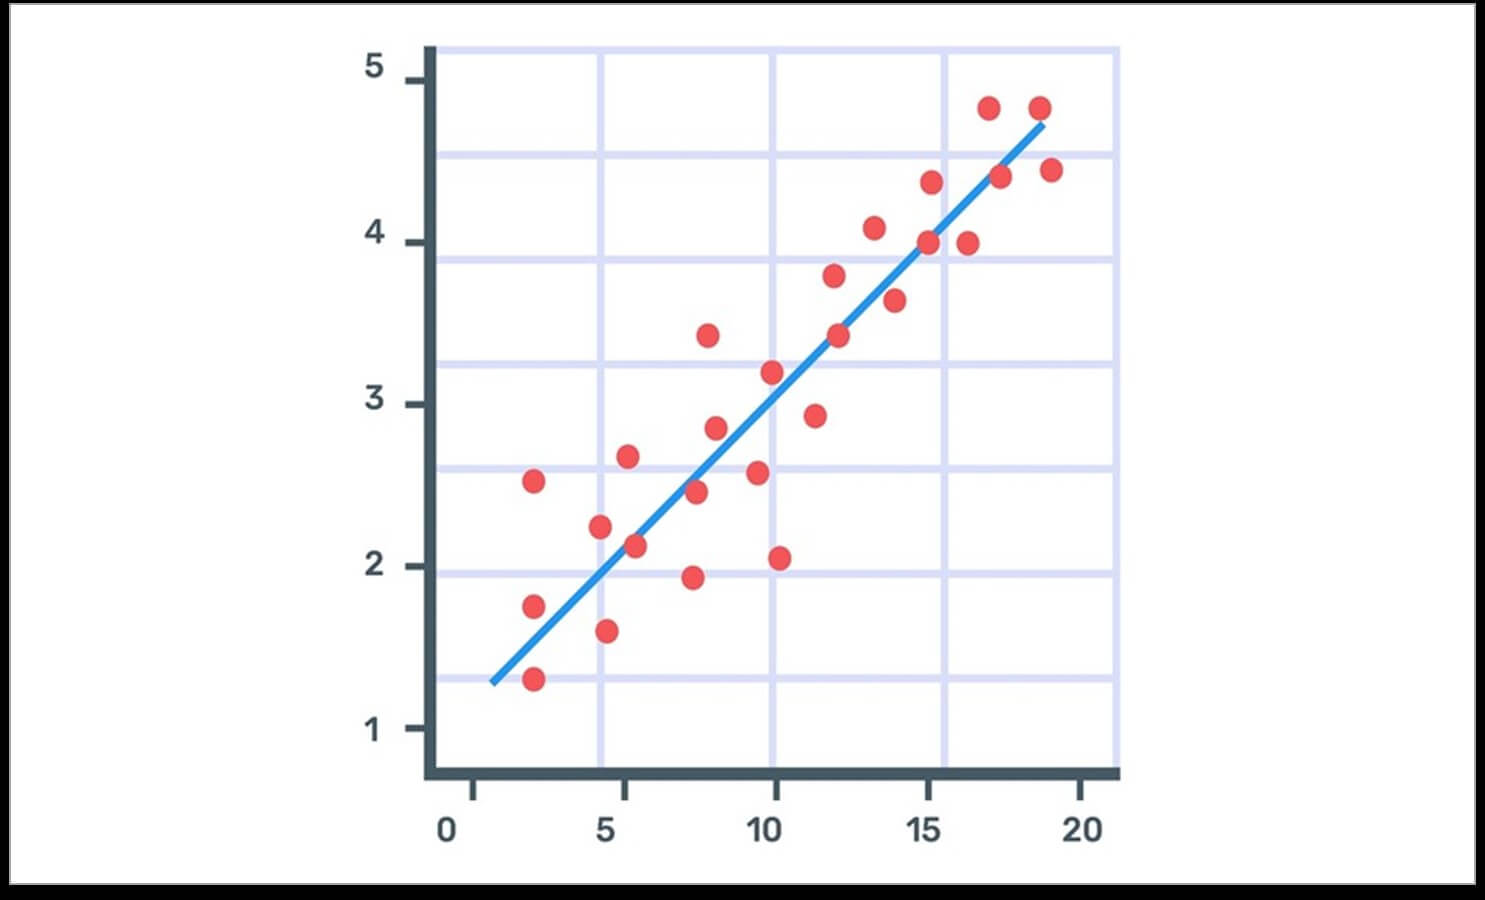 Scatter plot charts aren't typically used in a sales pitch deck